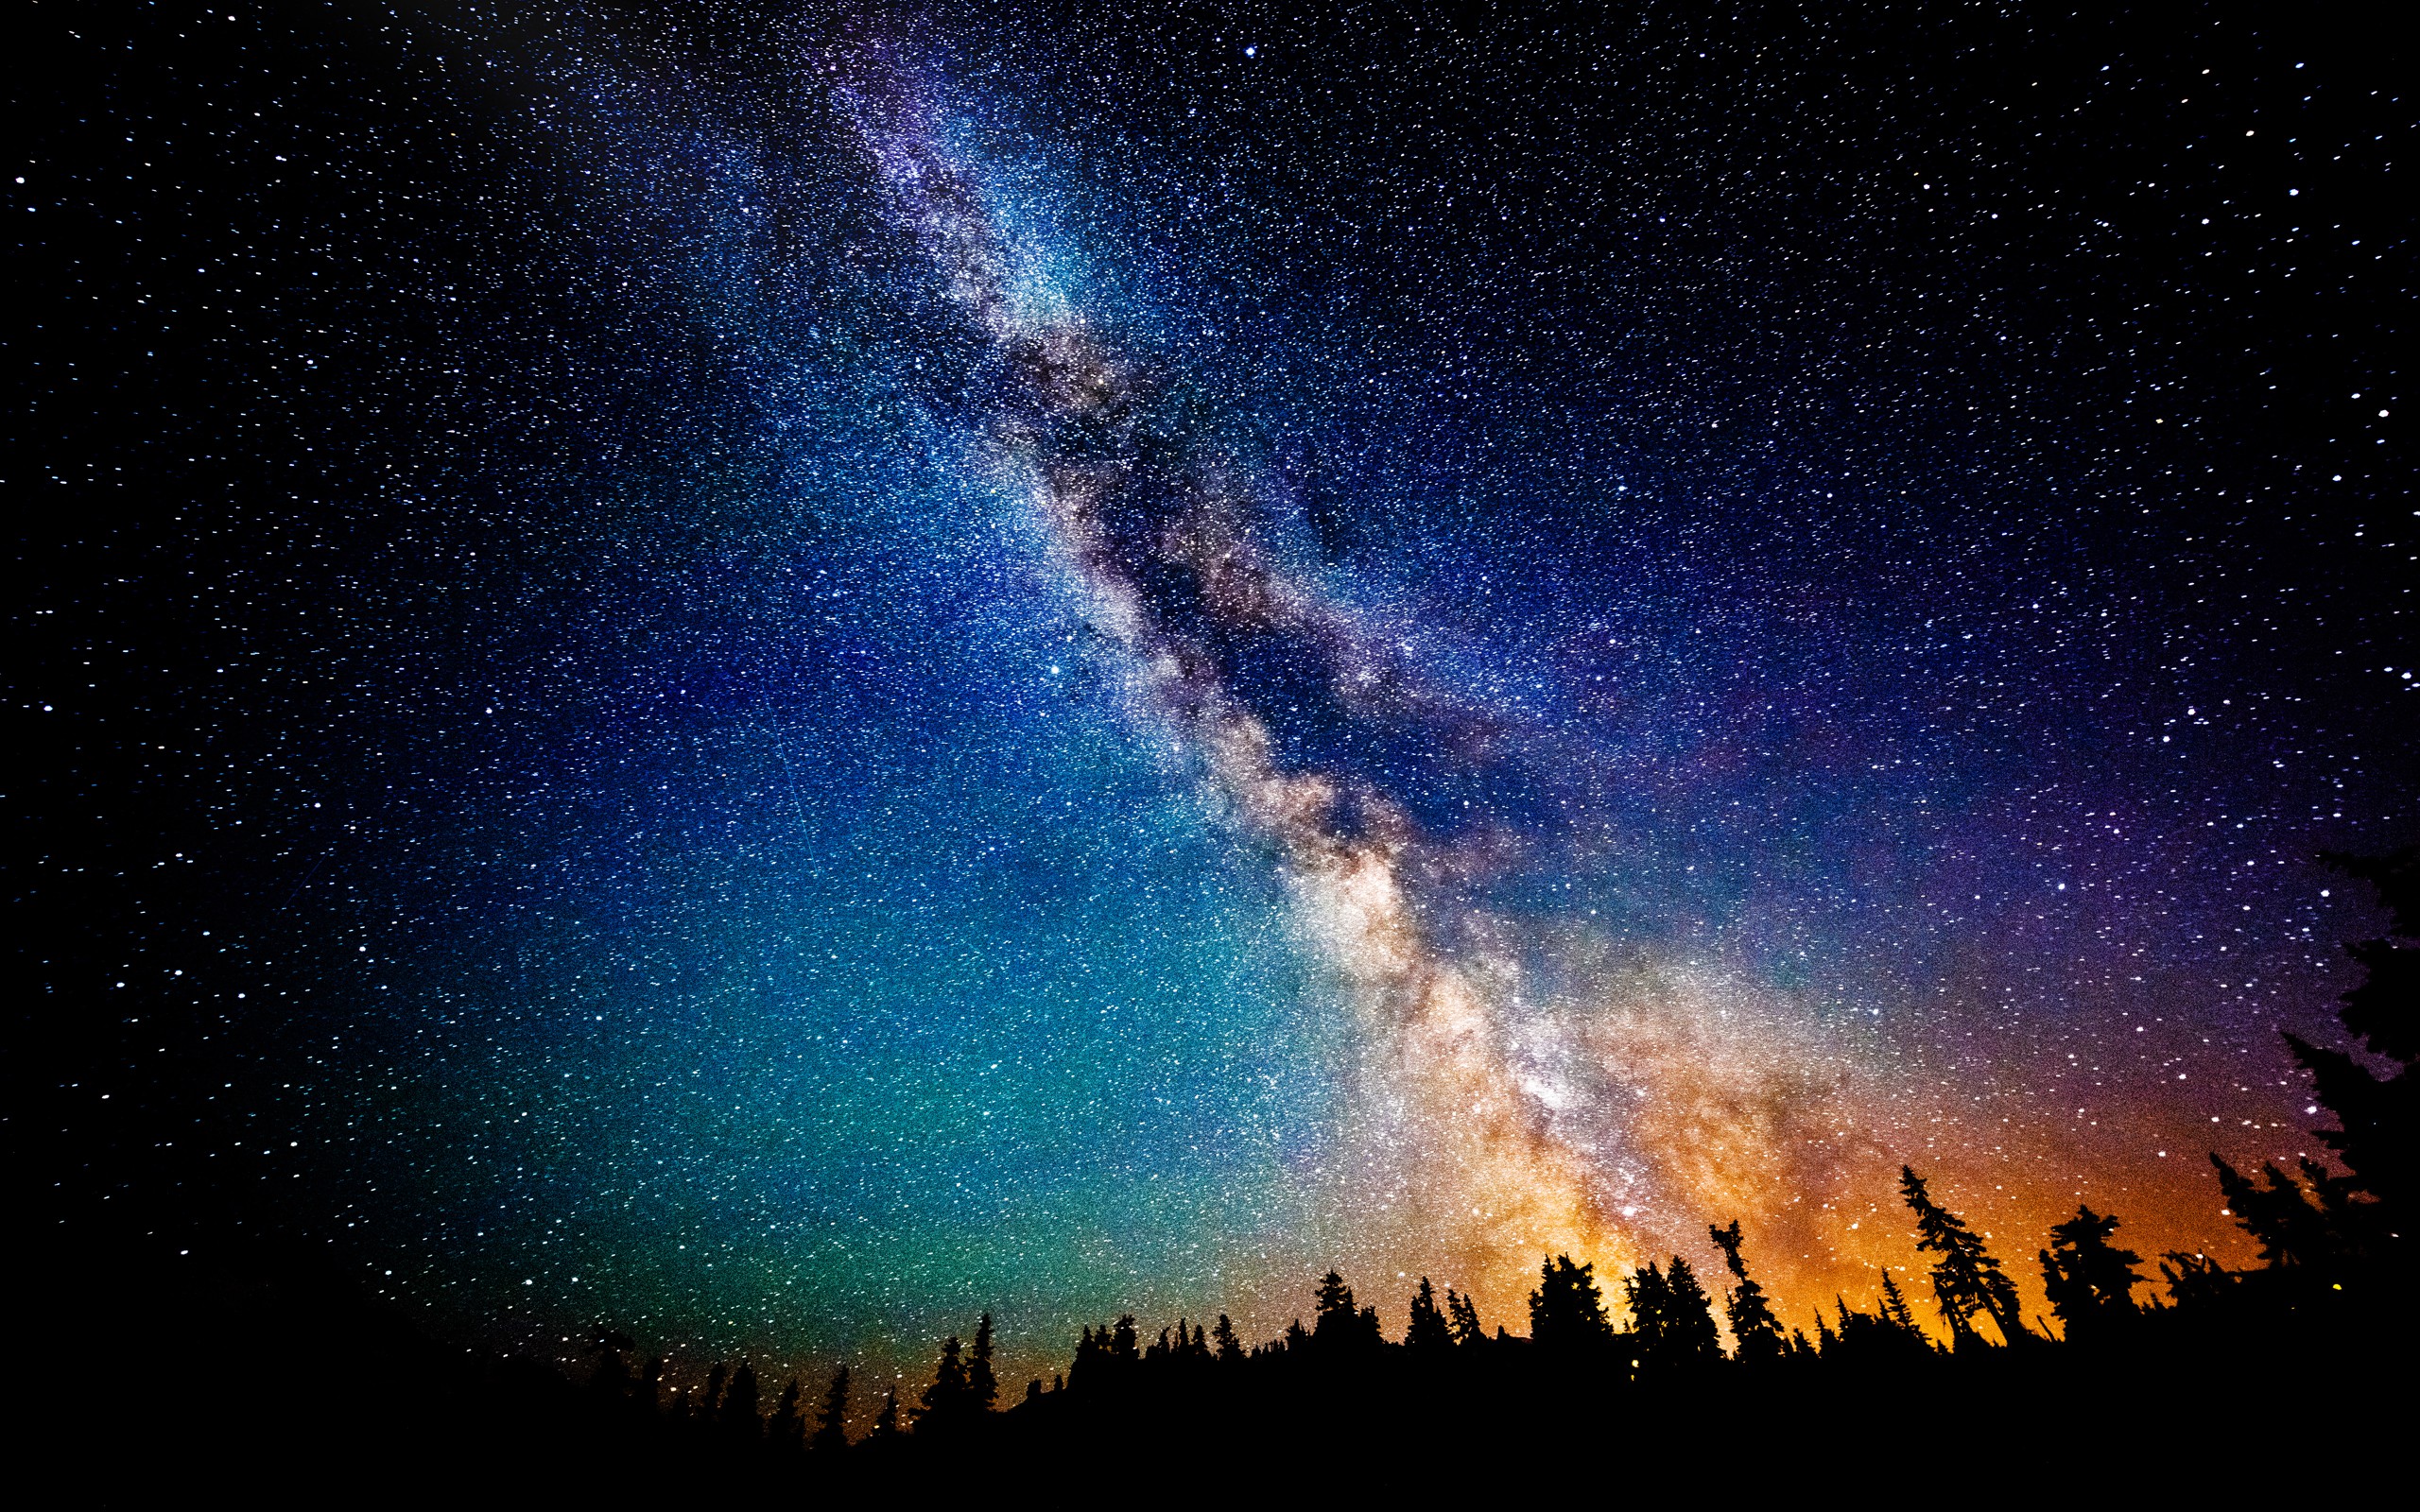 Milky Way Stars Constitute A Beautiful Landscape In The Sky